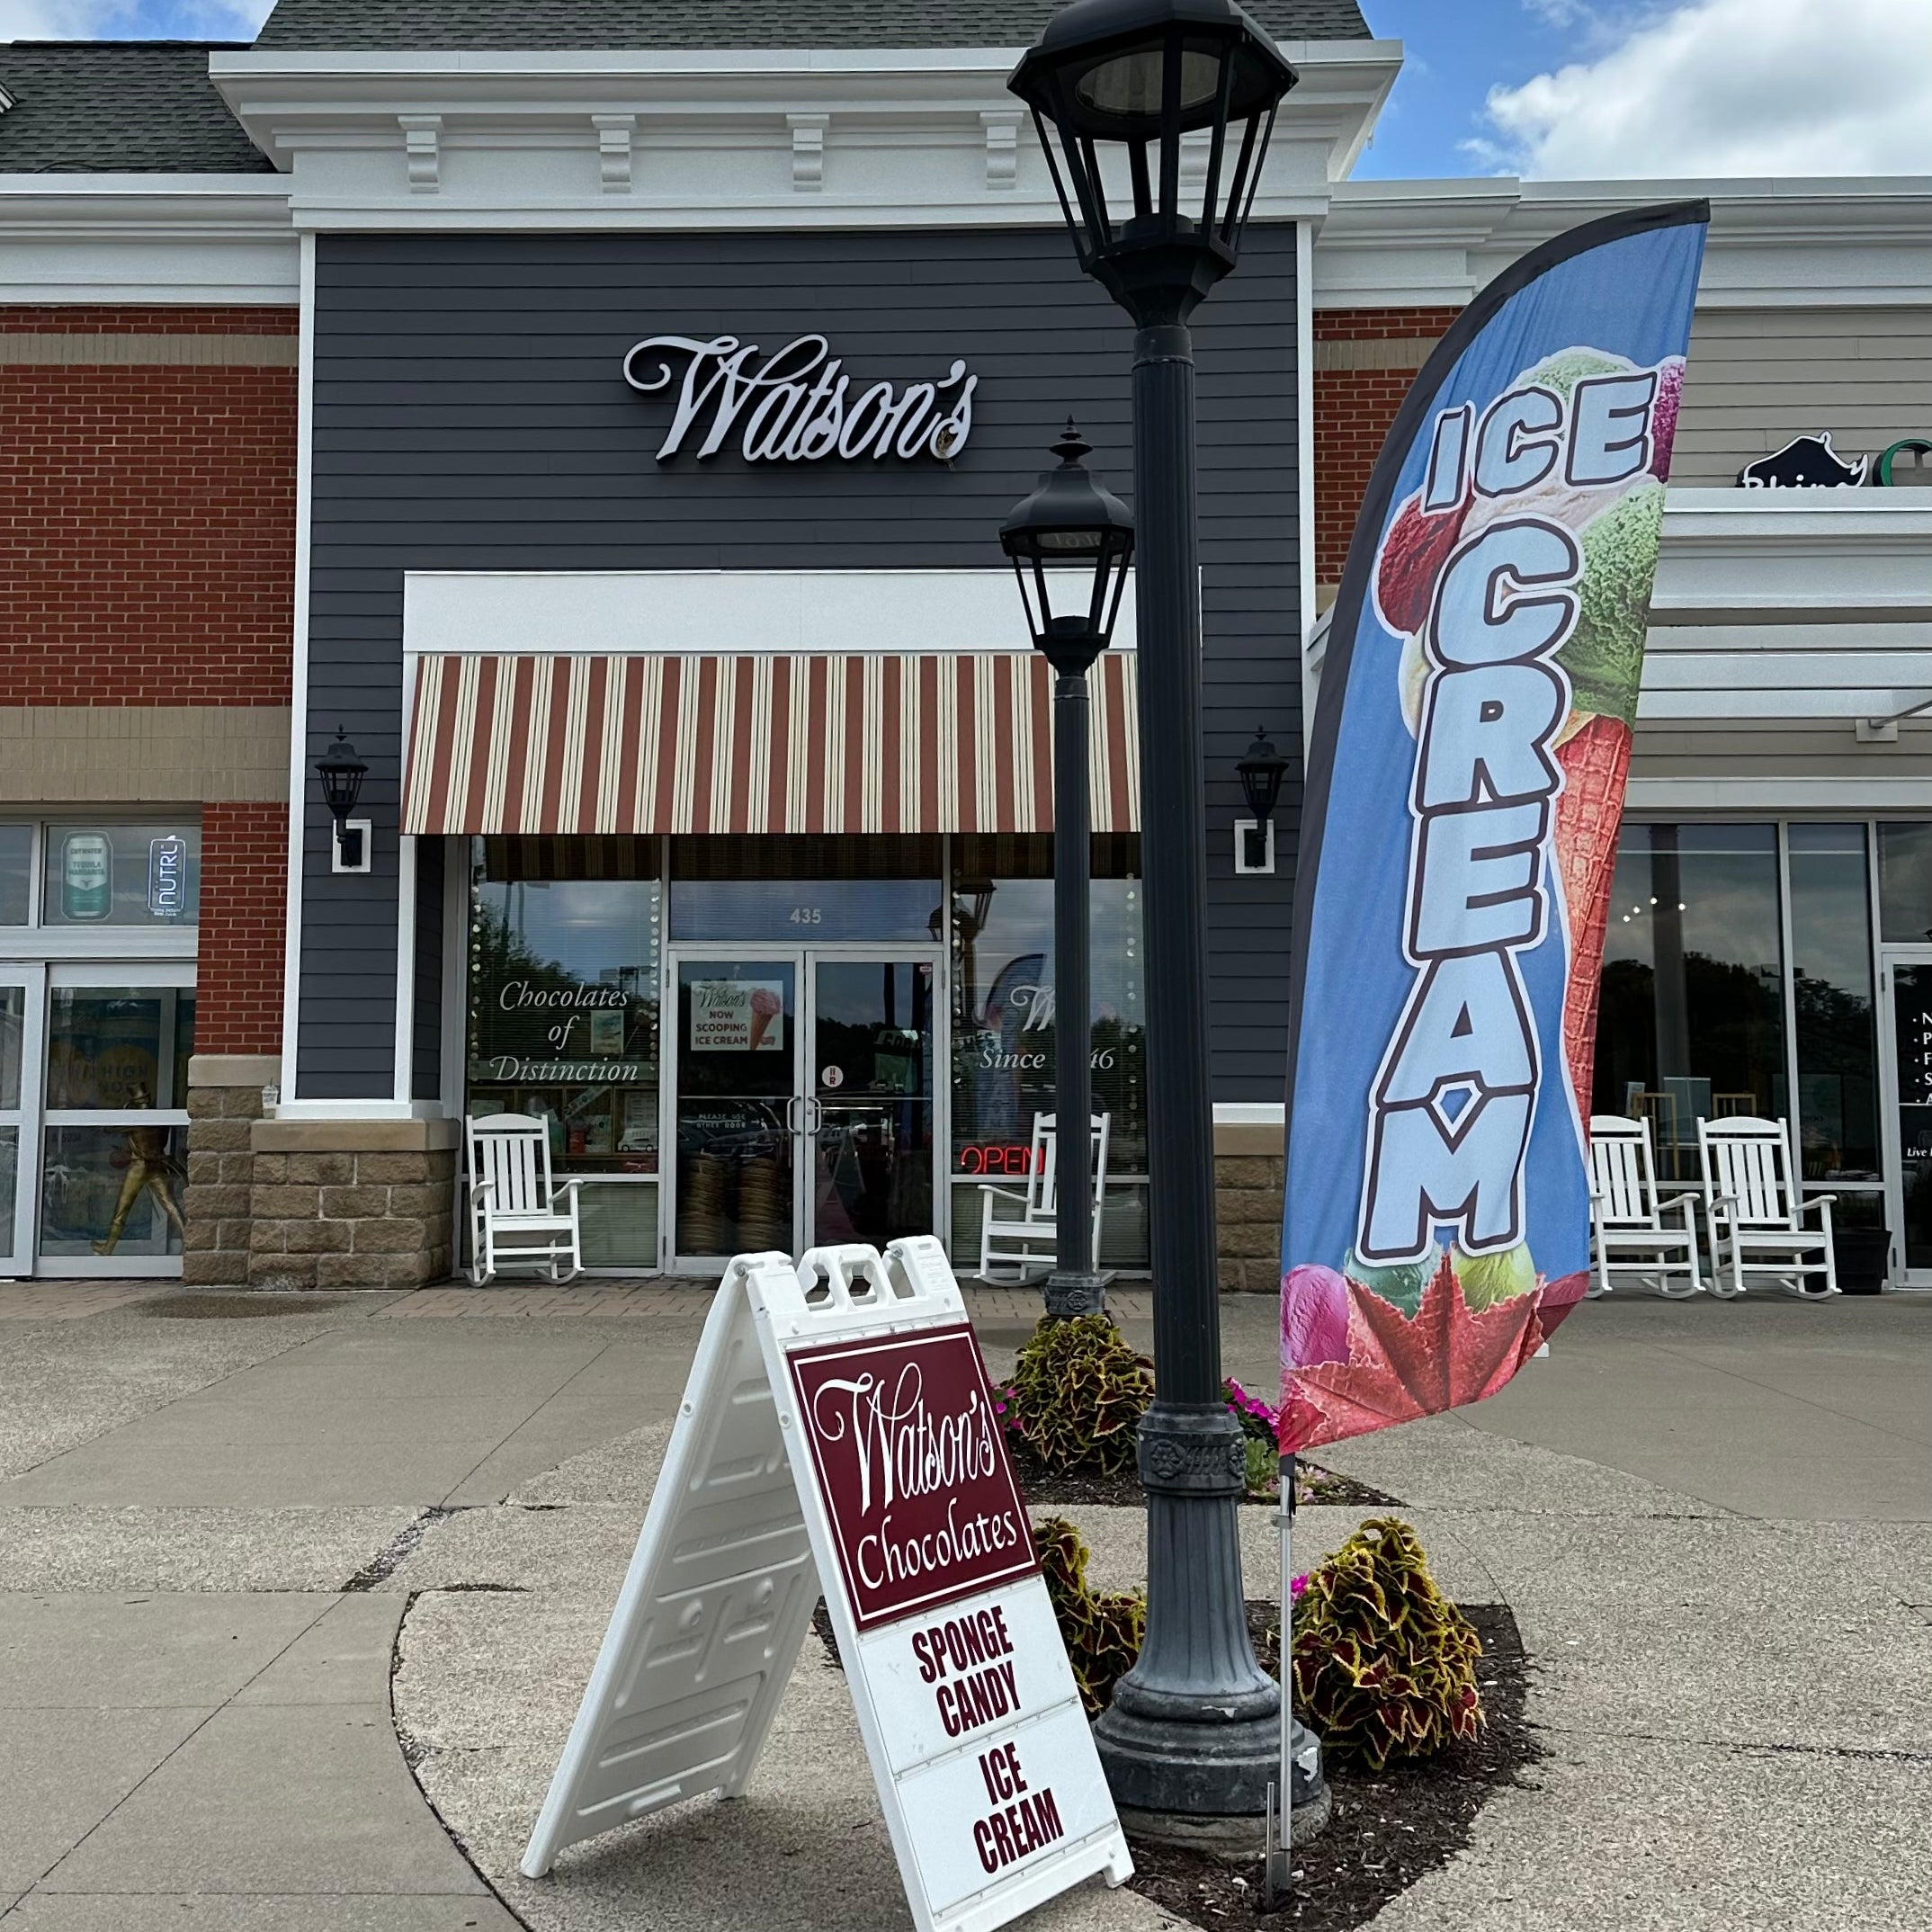 Profile: Watson's in Victor, NY